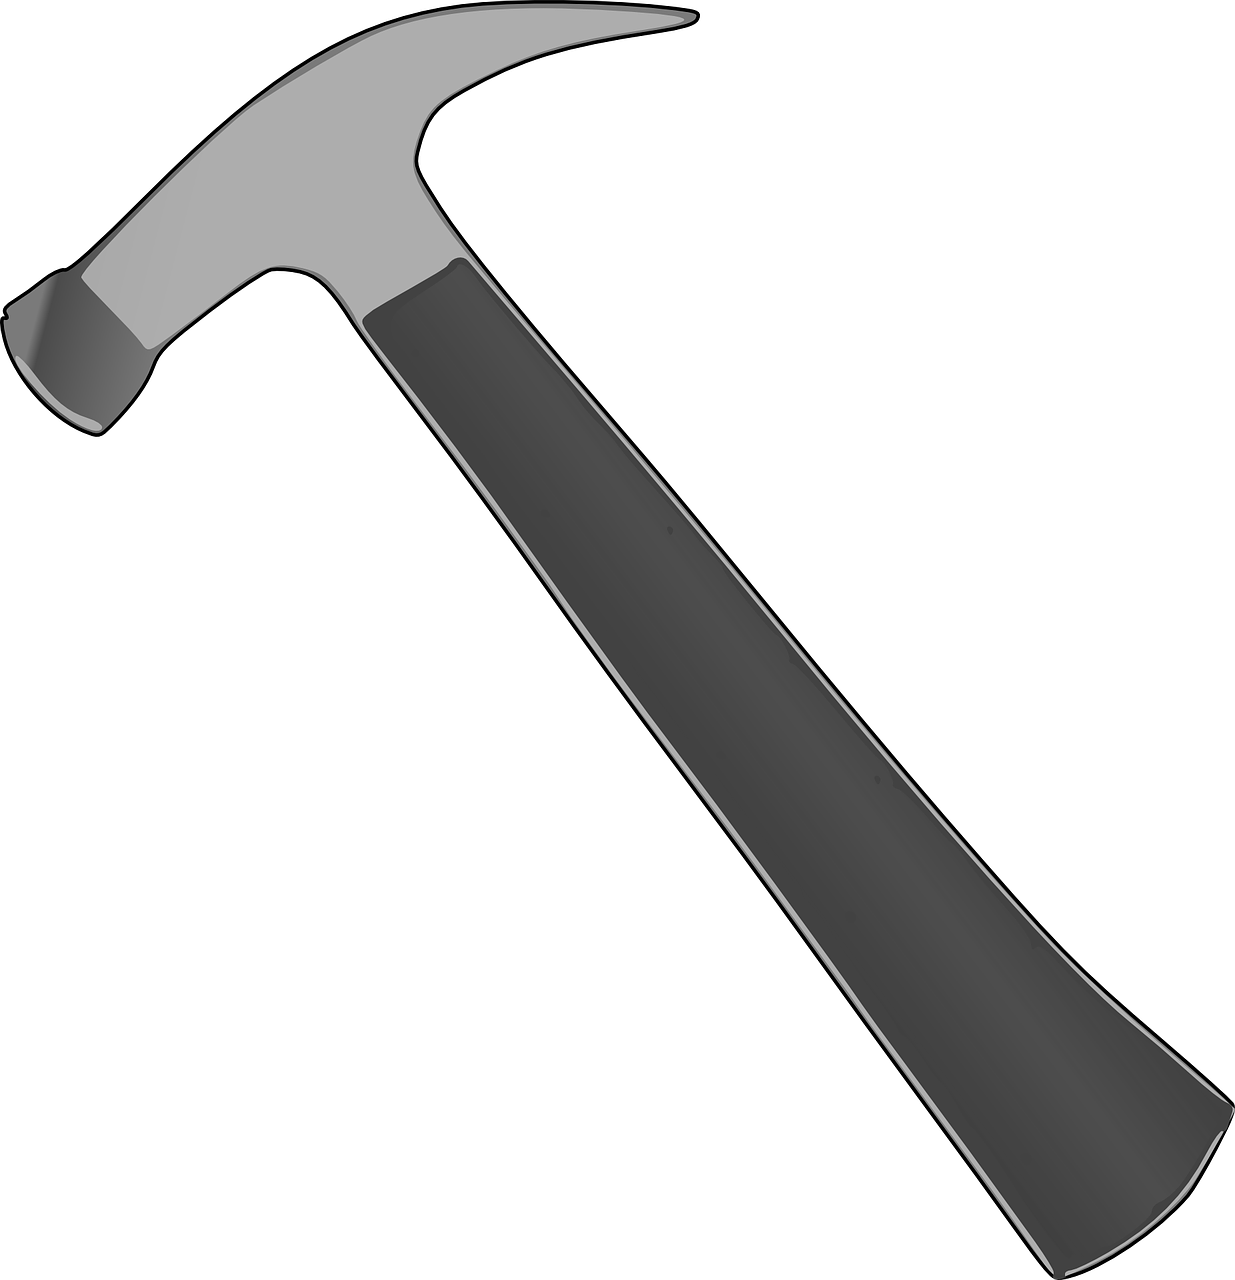 Hammer Tool Animation Clip art - hammer png download - 1235*1280 - Free ...